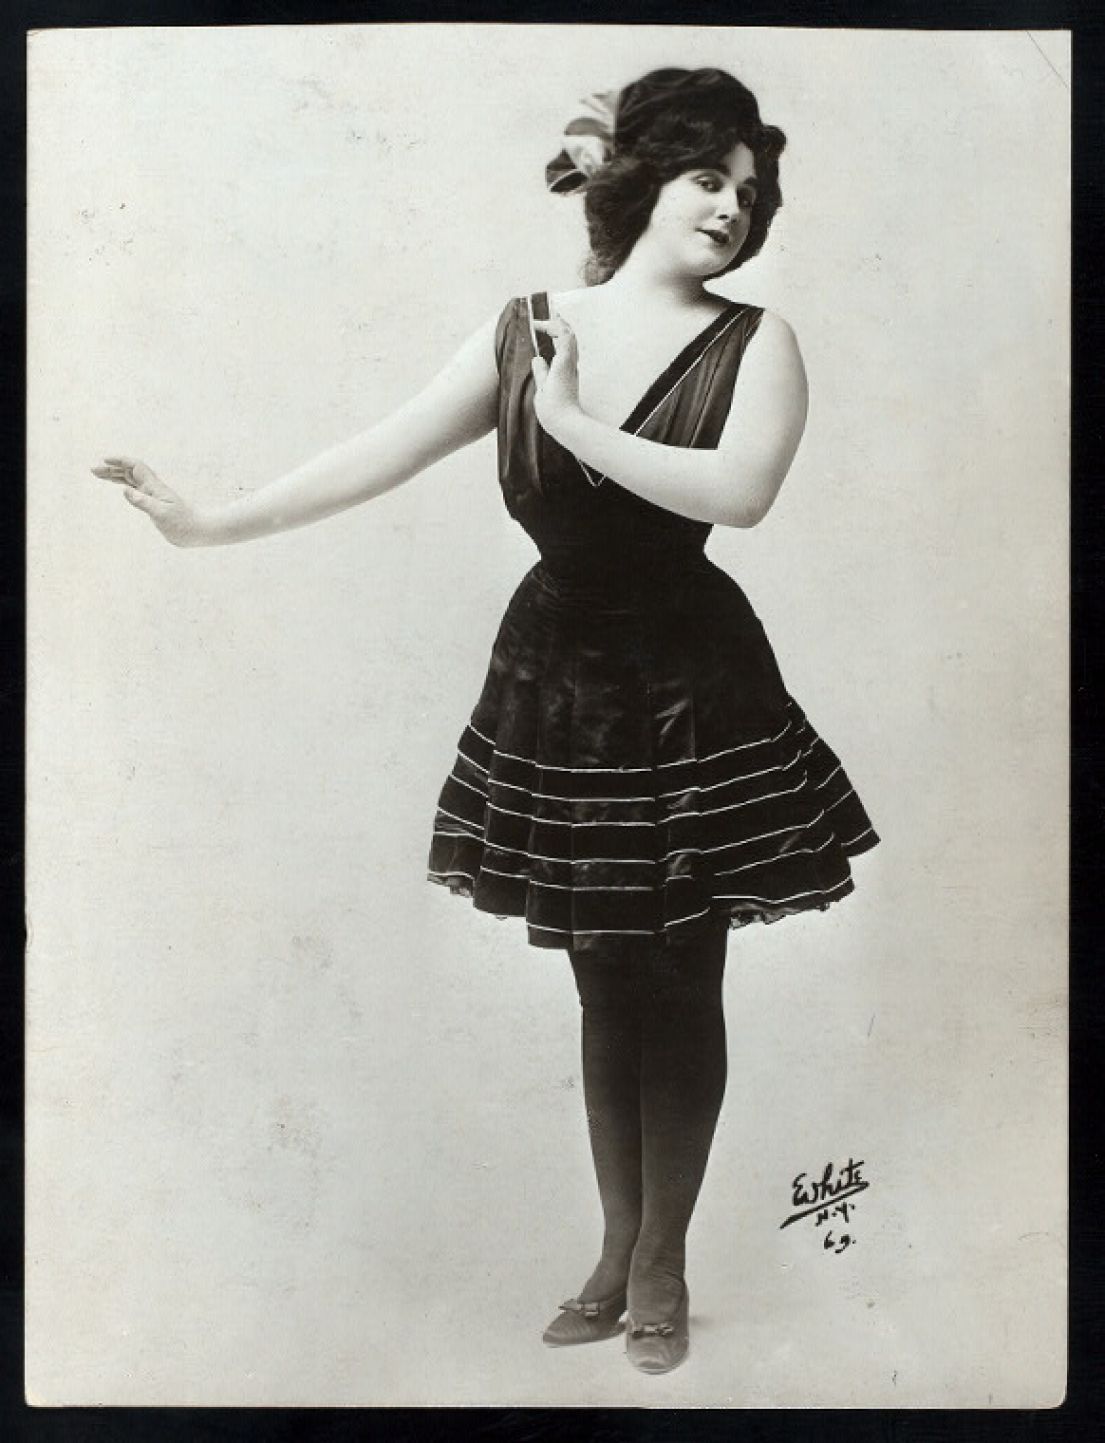 A black and white photo of a famous female impersonator in 1911, wearing a short cocktail dress.